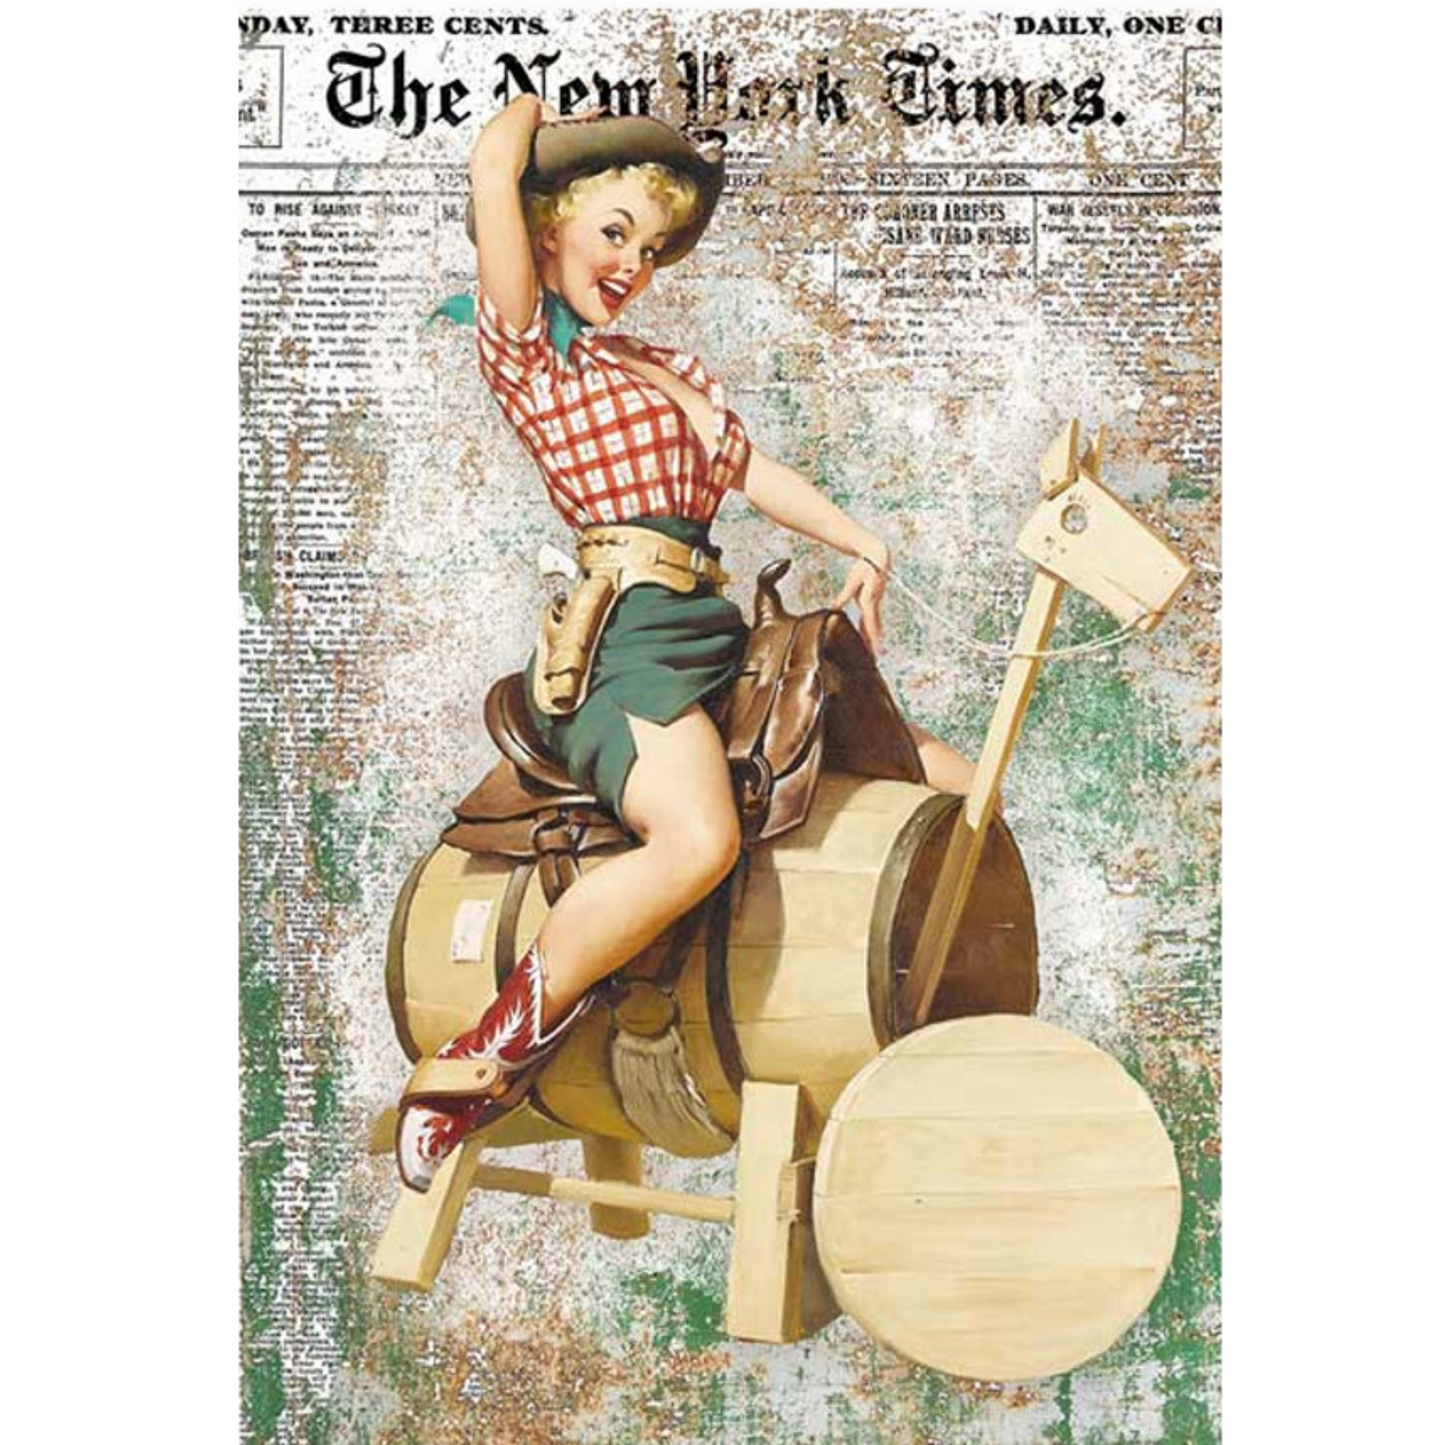 "Barrel Bull Riding" decoupage rice paper by Paper Designs. Size A4 available at Milton's Daughter.